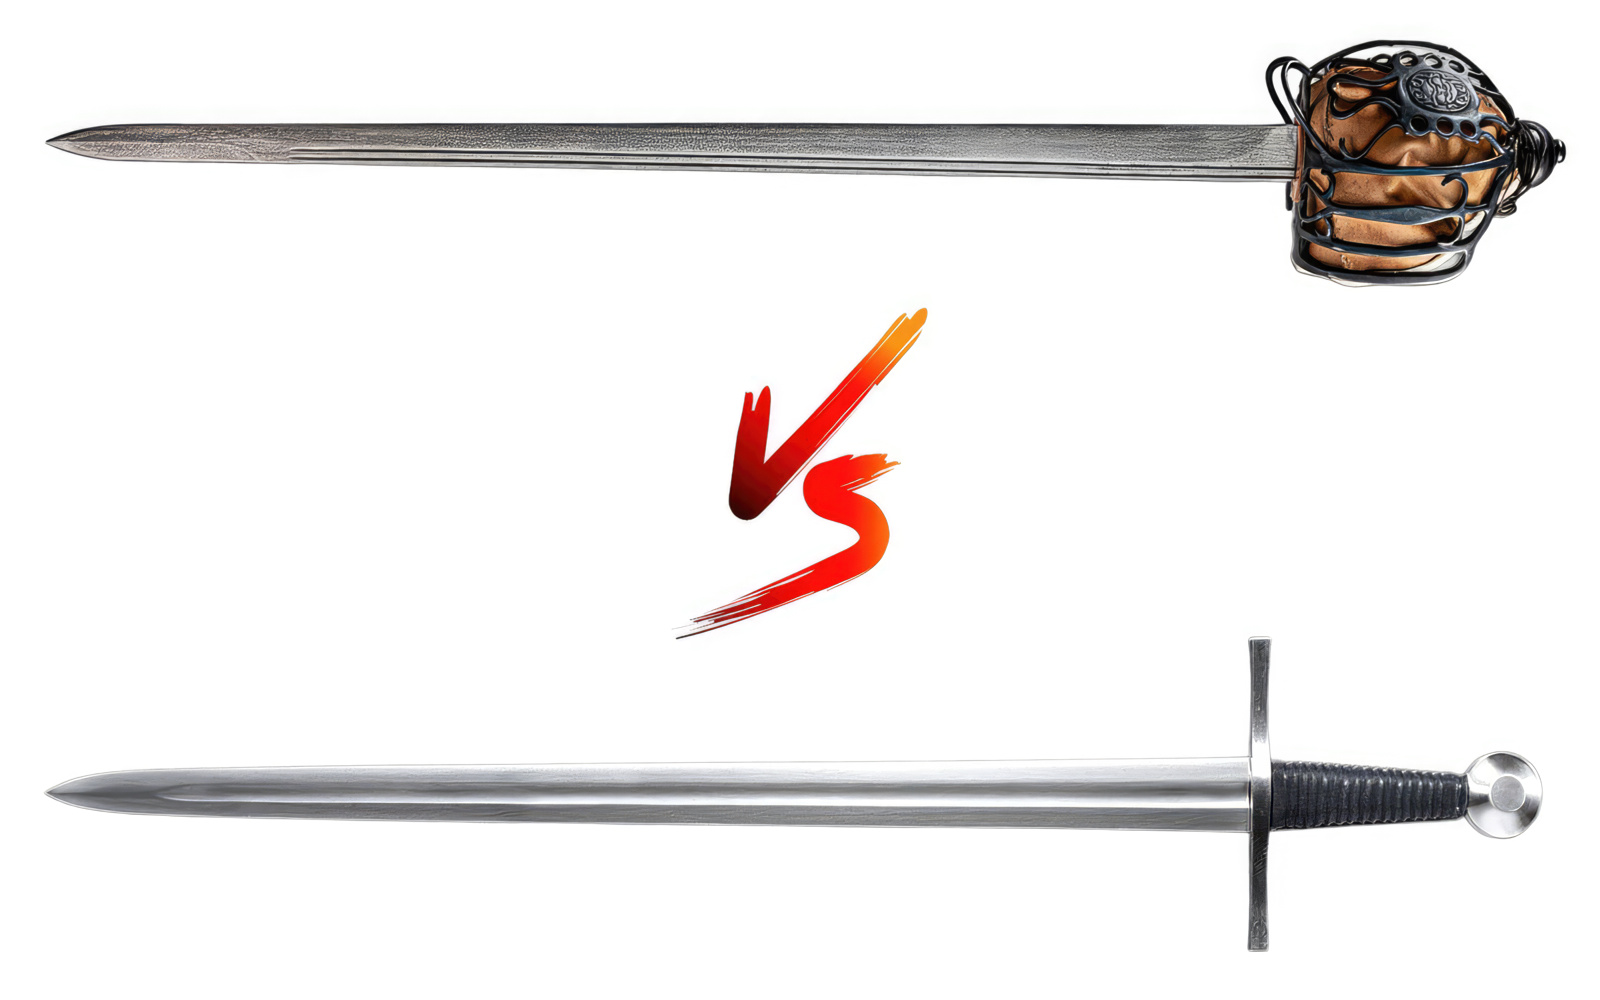 Broadsword vs Arming Sword: Terms, History, and Combat Uses